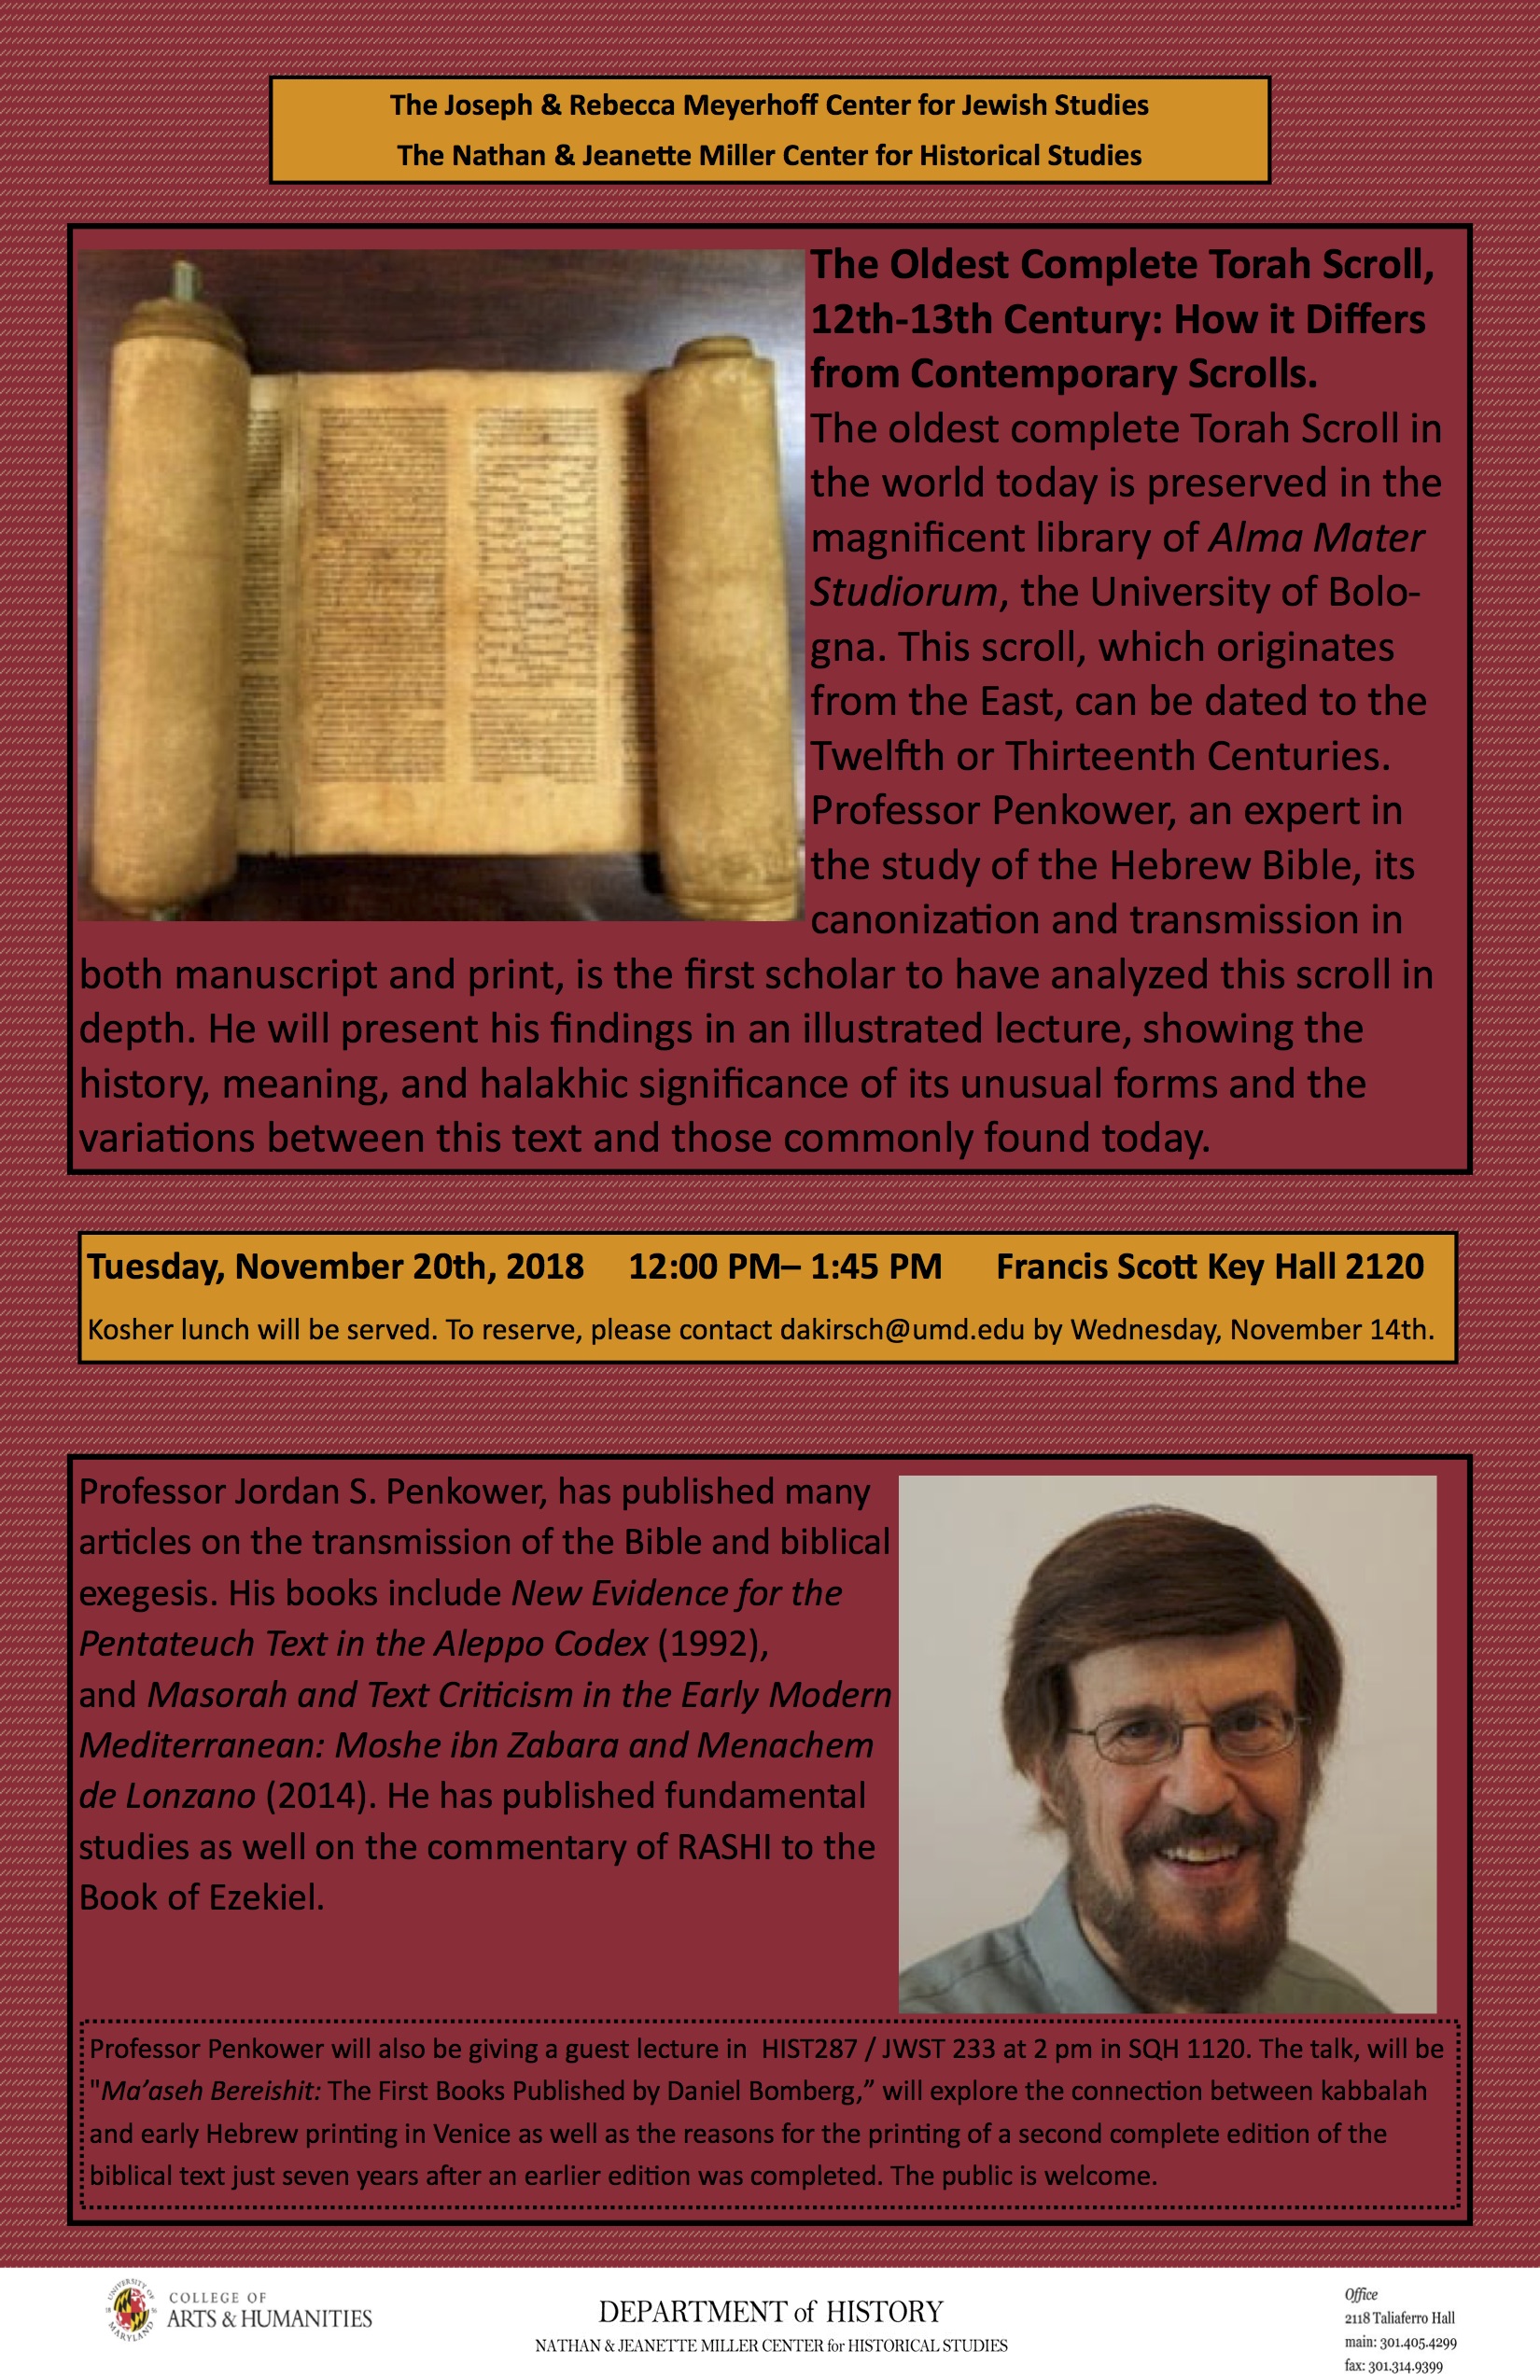 Image for event - The Oldest Complete Torah Scroll, 12th-13th Century: How it Differs from Contemporary Scrolls